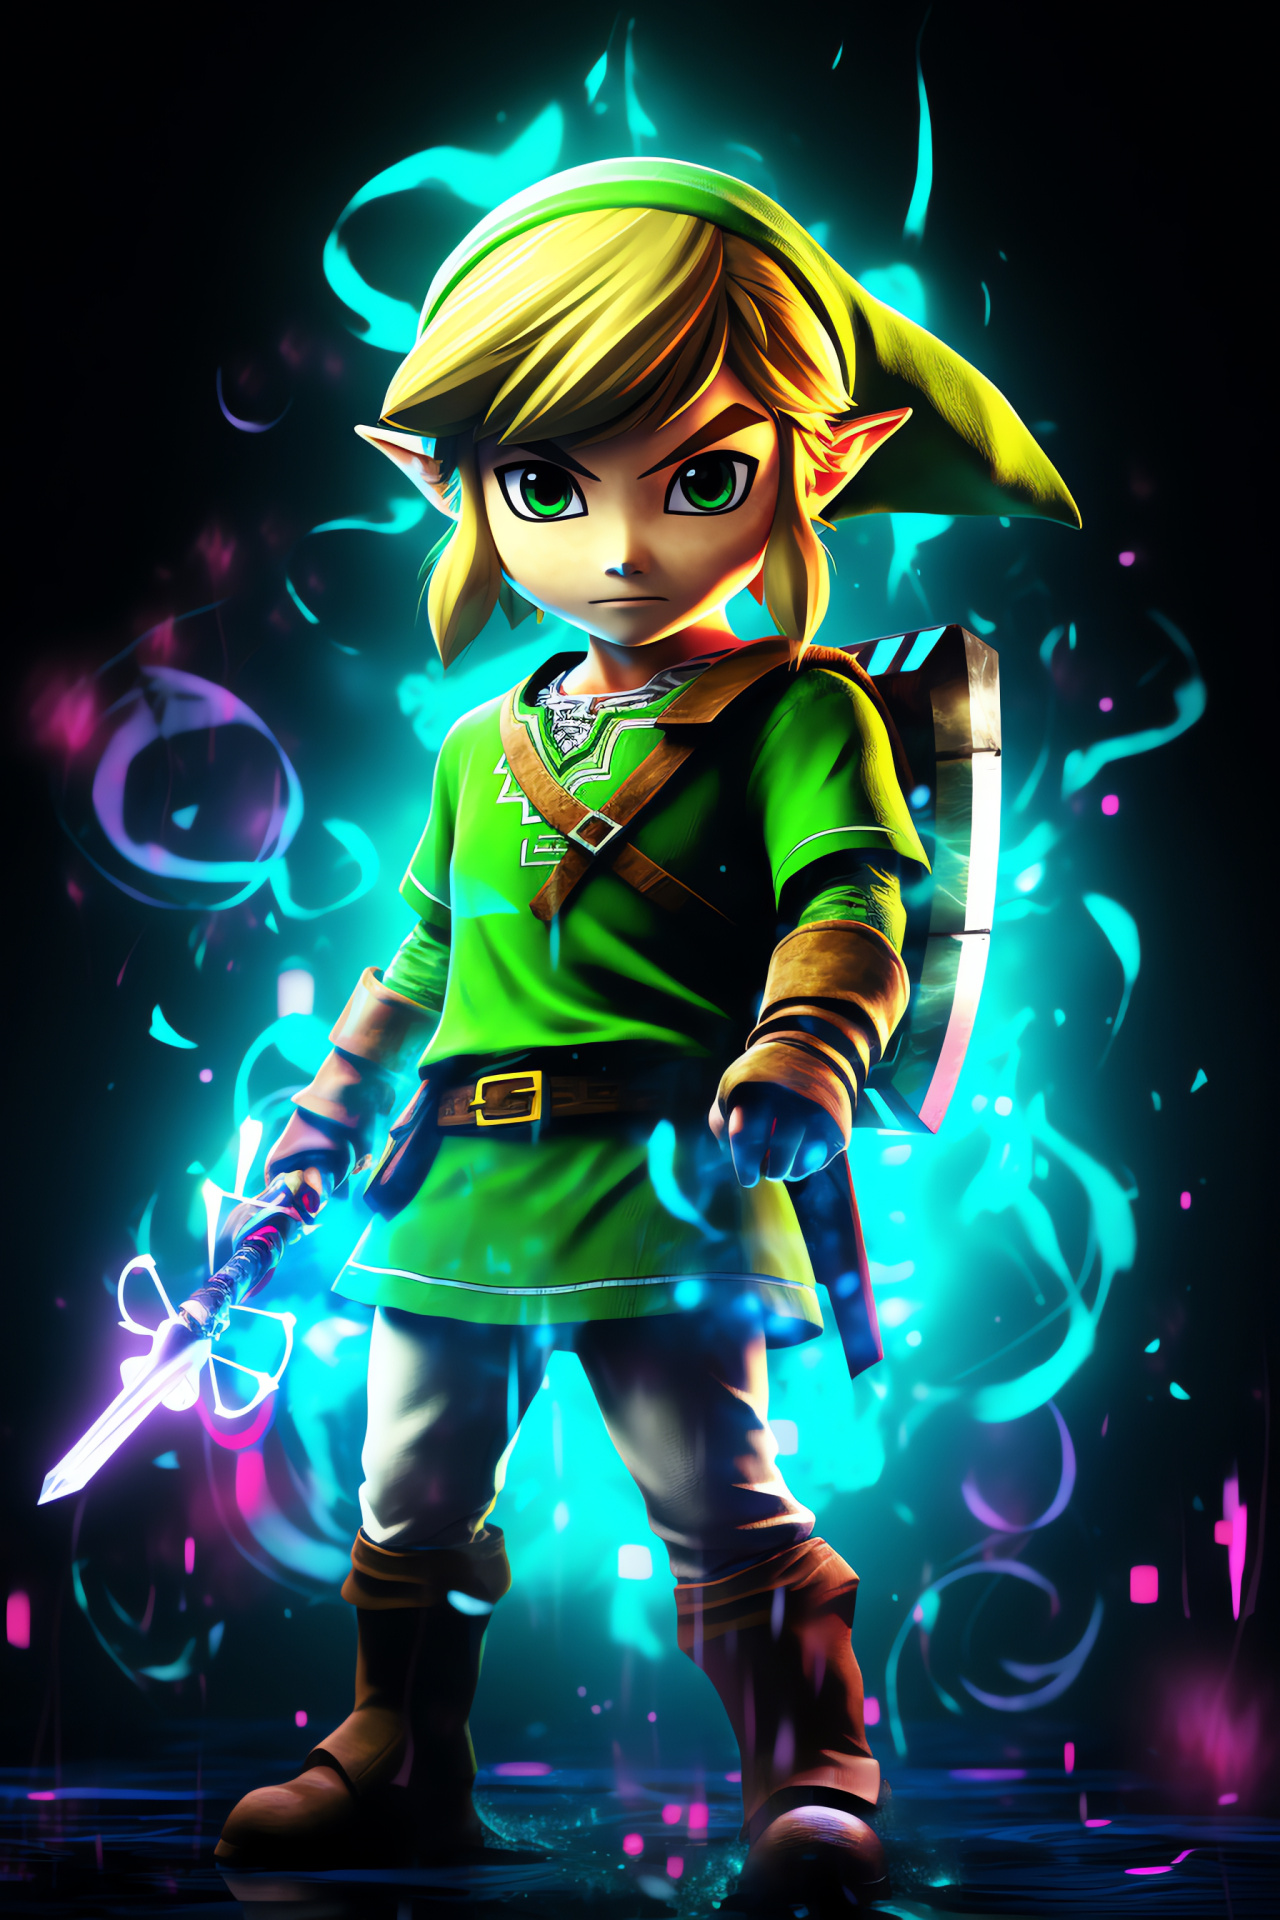 Toon Link archer, The Wind Waker installment, Stealth stealth strategy, Ocean travel narrative, Adventure game protagonist, HD Phone Wallpaper